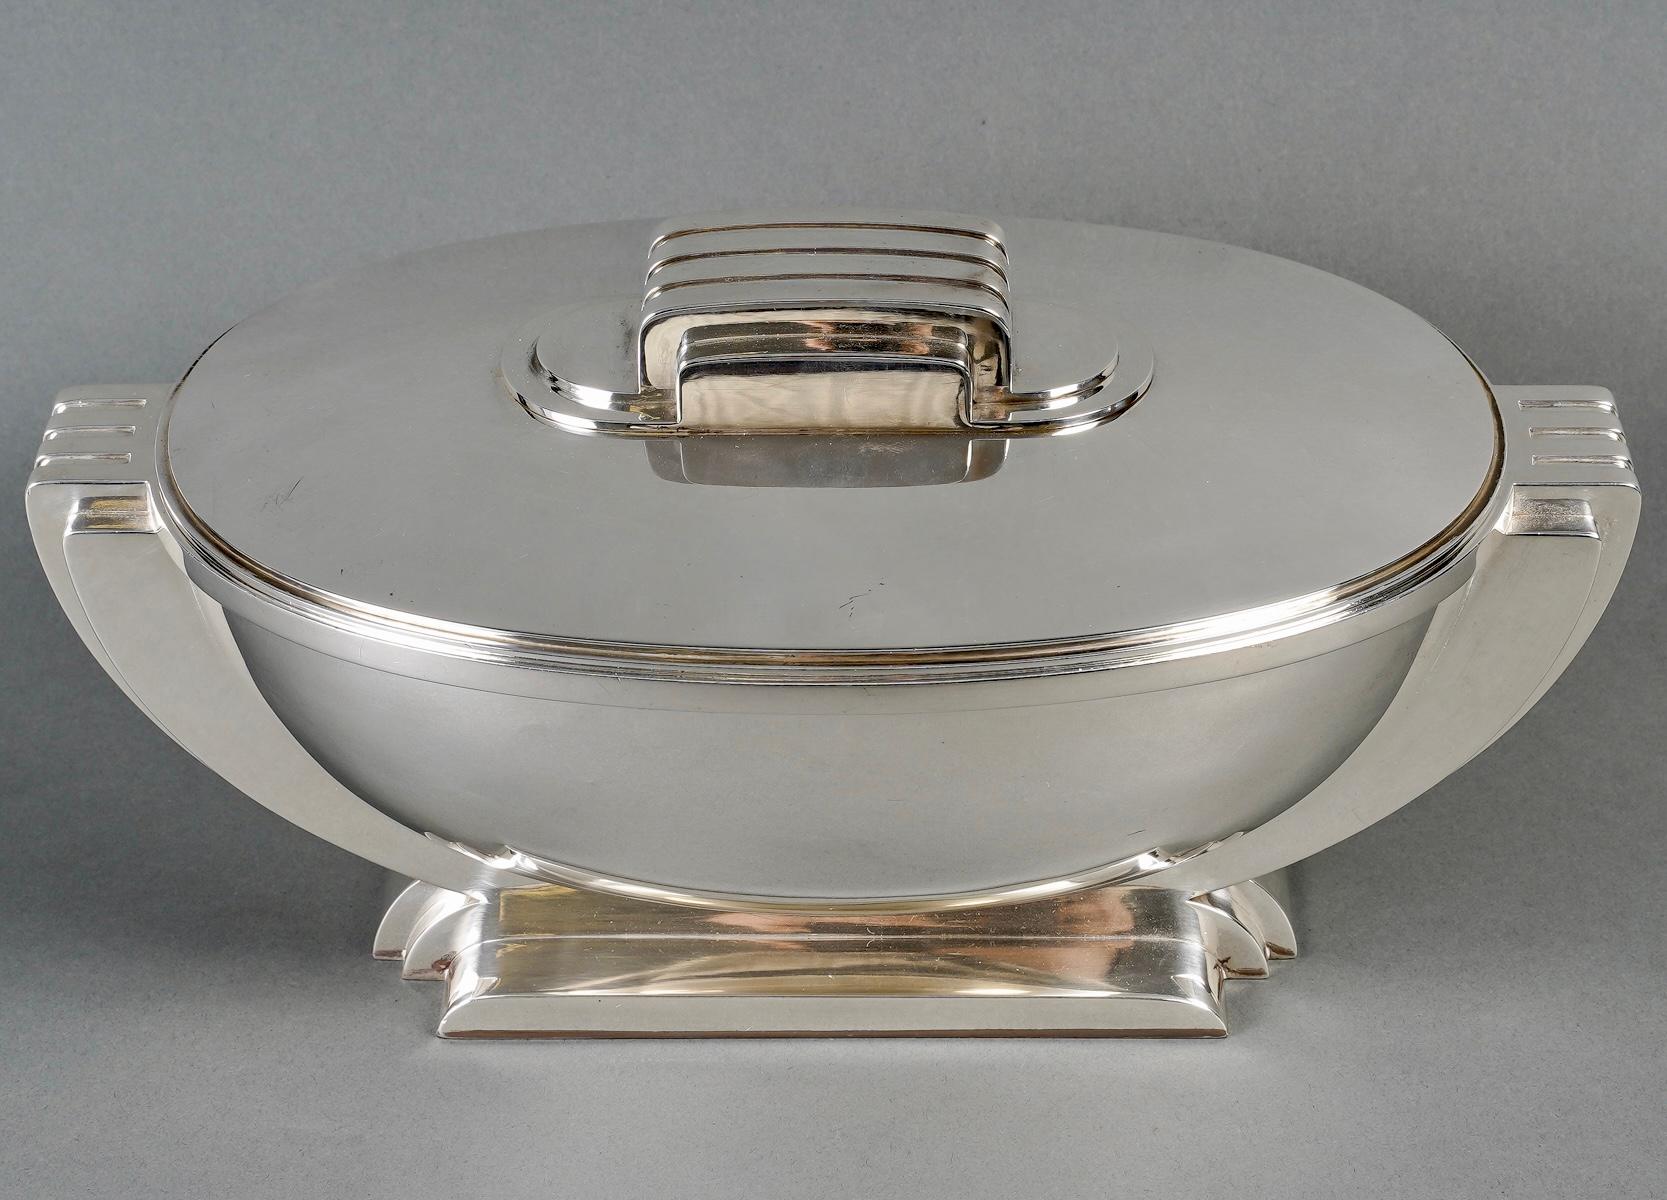 Tureen Centerpiece Modernist Art Deco made in 950/1000th solid sterling silver by Jean TETARD.
All parts are stamped with Minverve 1st Title and Tetard Freres goldsmith stamp.

Perfect condition.
 
height: 16 cm
diameter with handles: 34,5 cm

Total